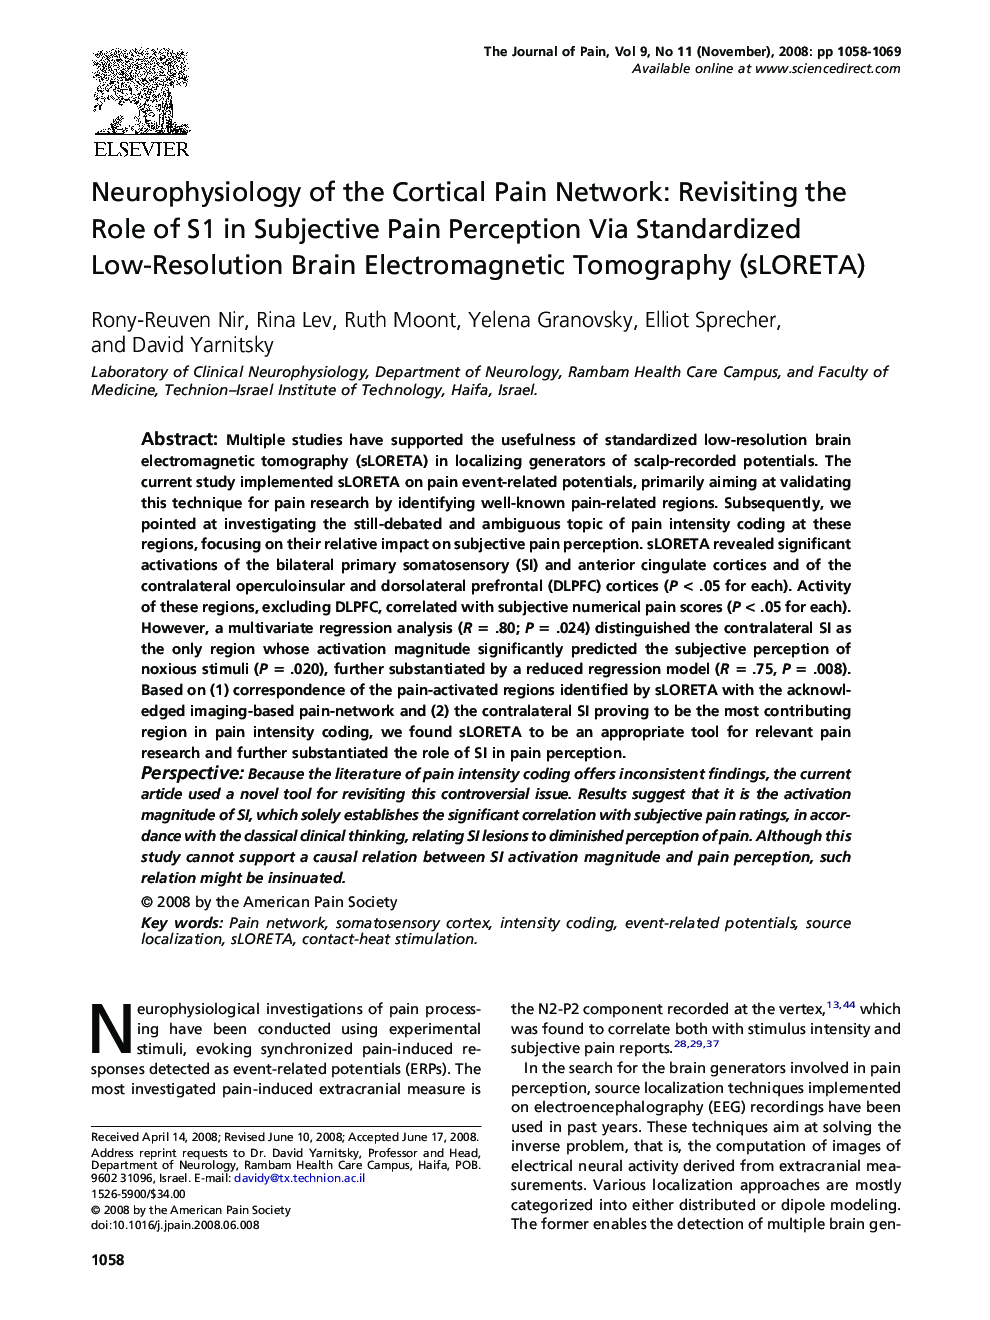 Neurophysiology of the Cortical Pain Network: Revisiting the Role of S1 in Subjective Pain Perception Via Standardized Low-Resolution Brain Electromagnetic Tomography (sLORETA)